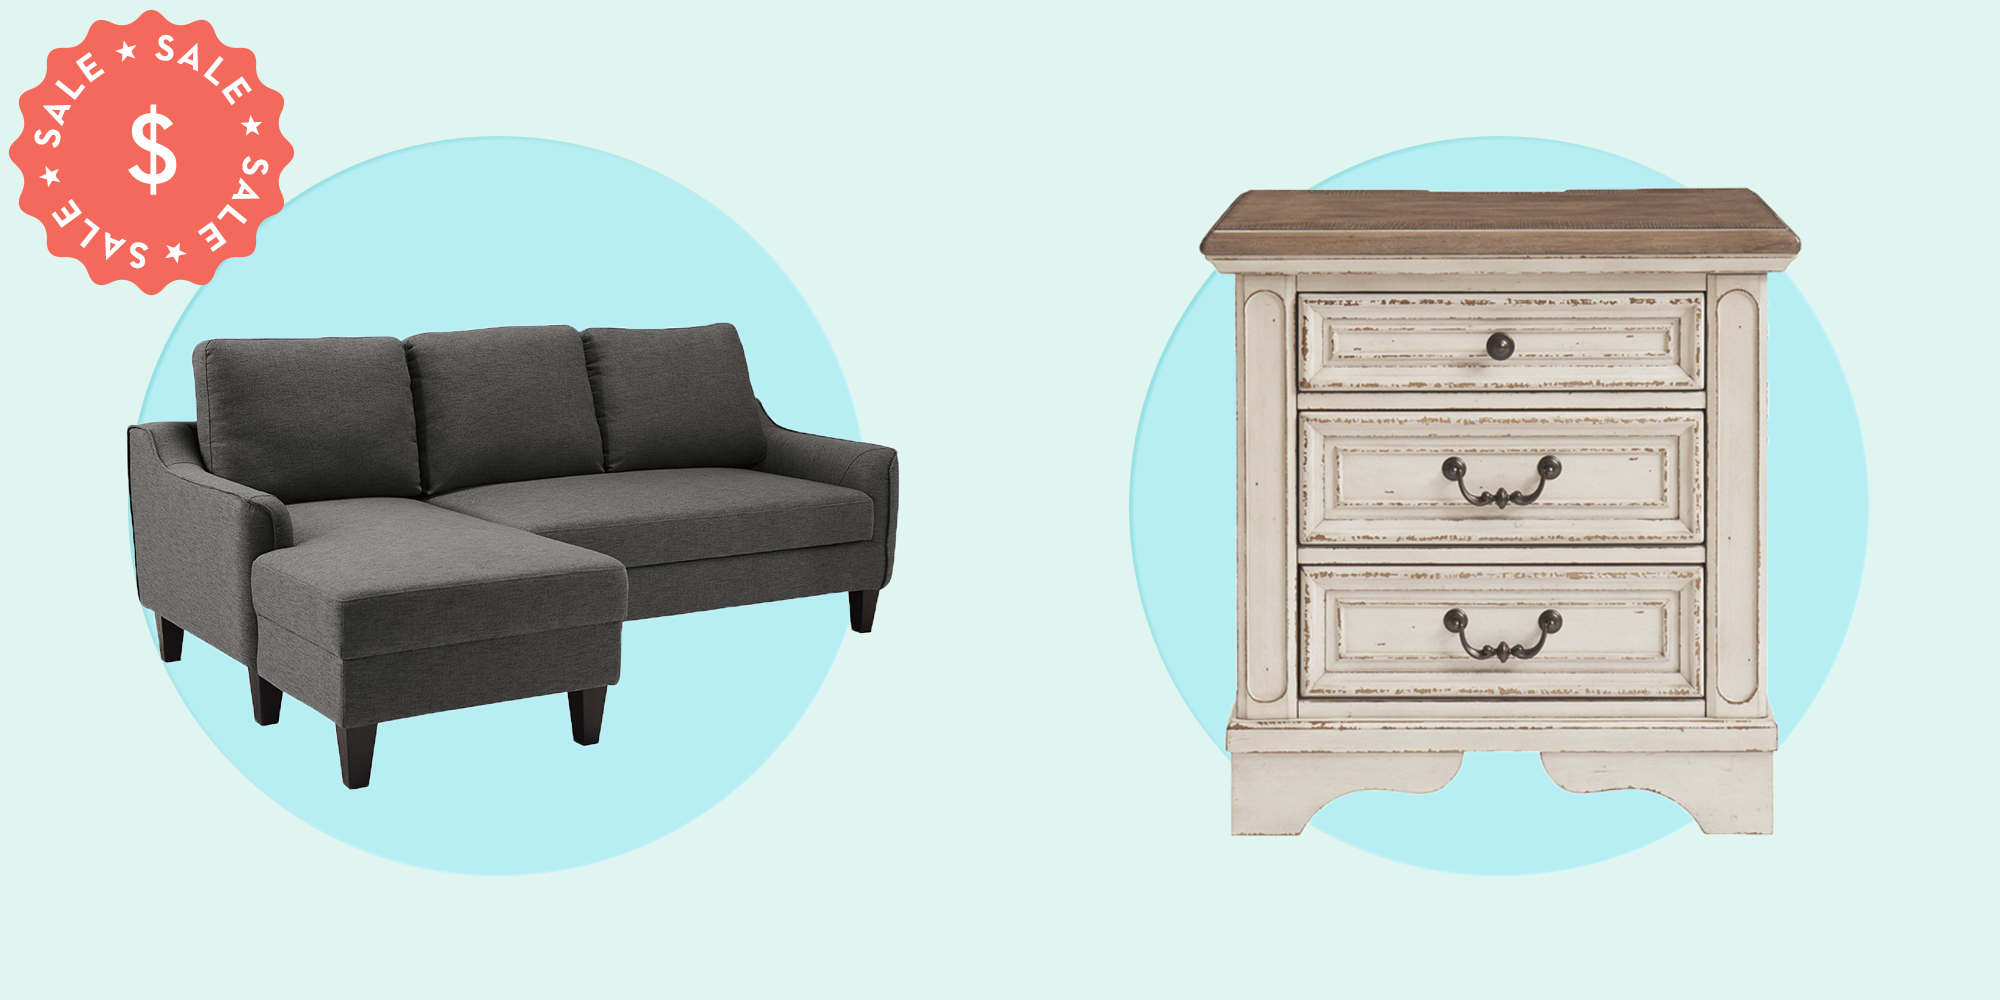 The Best Black Friday Sales At Ashley Furniture